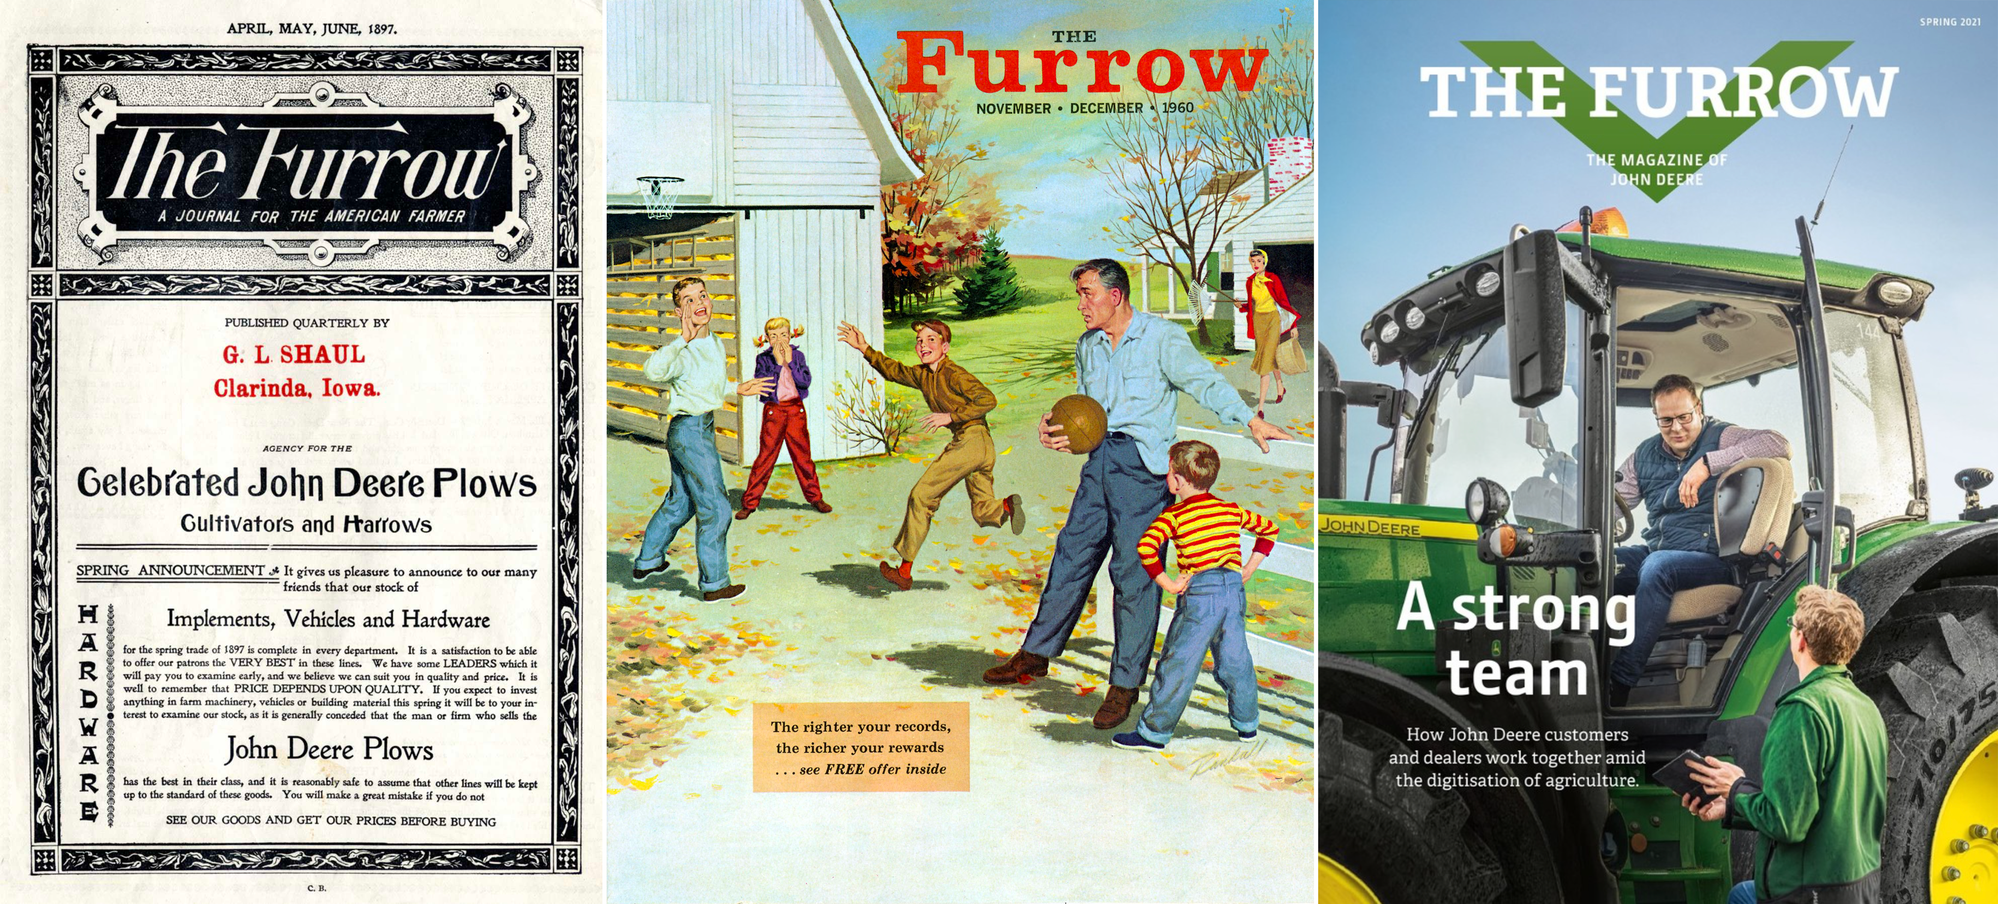 The Furrow Magazine over the years